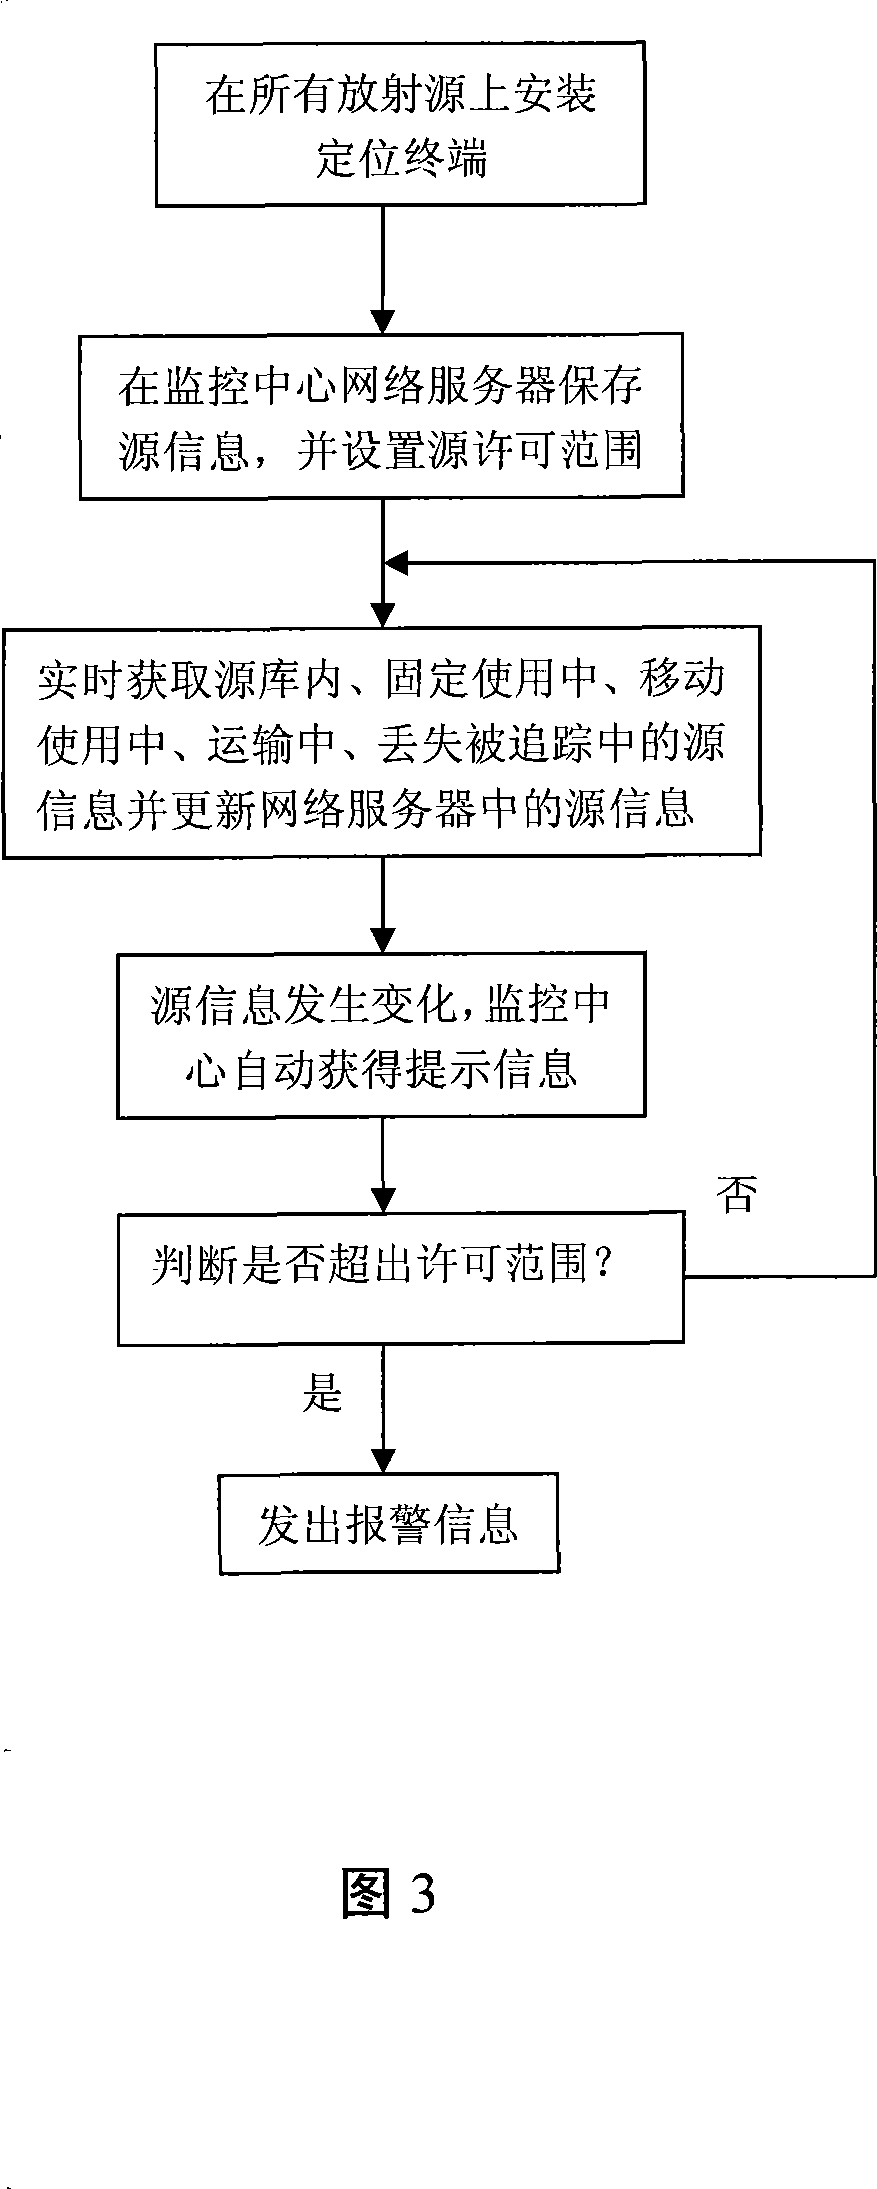 Method and system for automatically monitoring and real time monitoring radioactive source